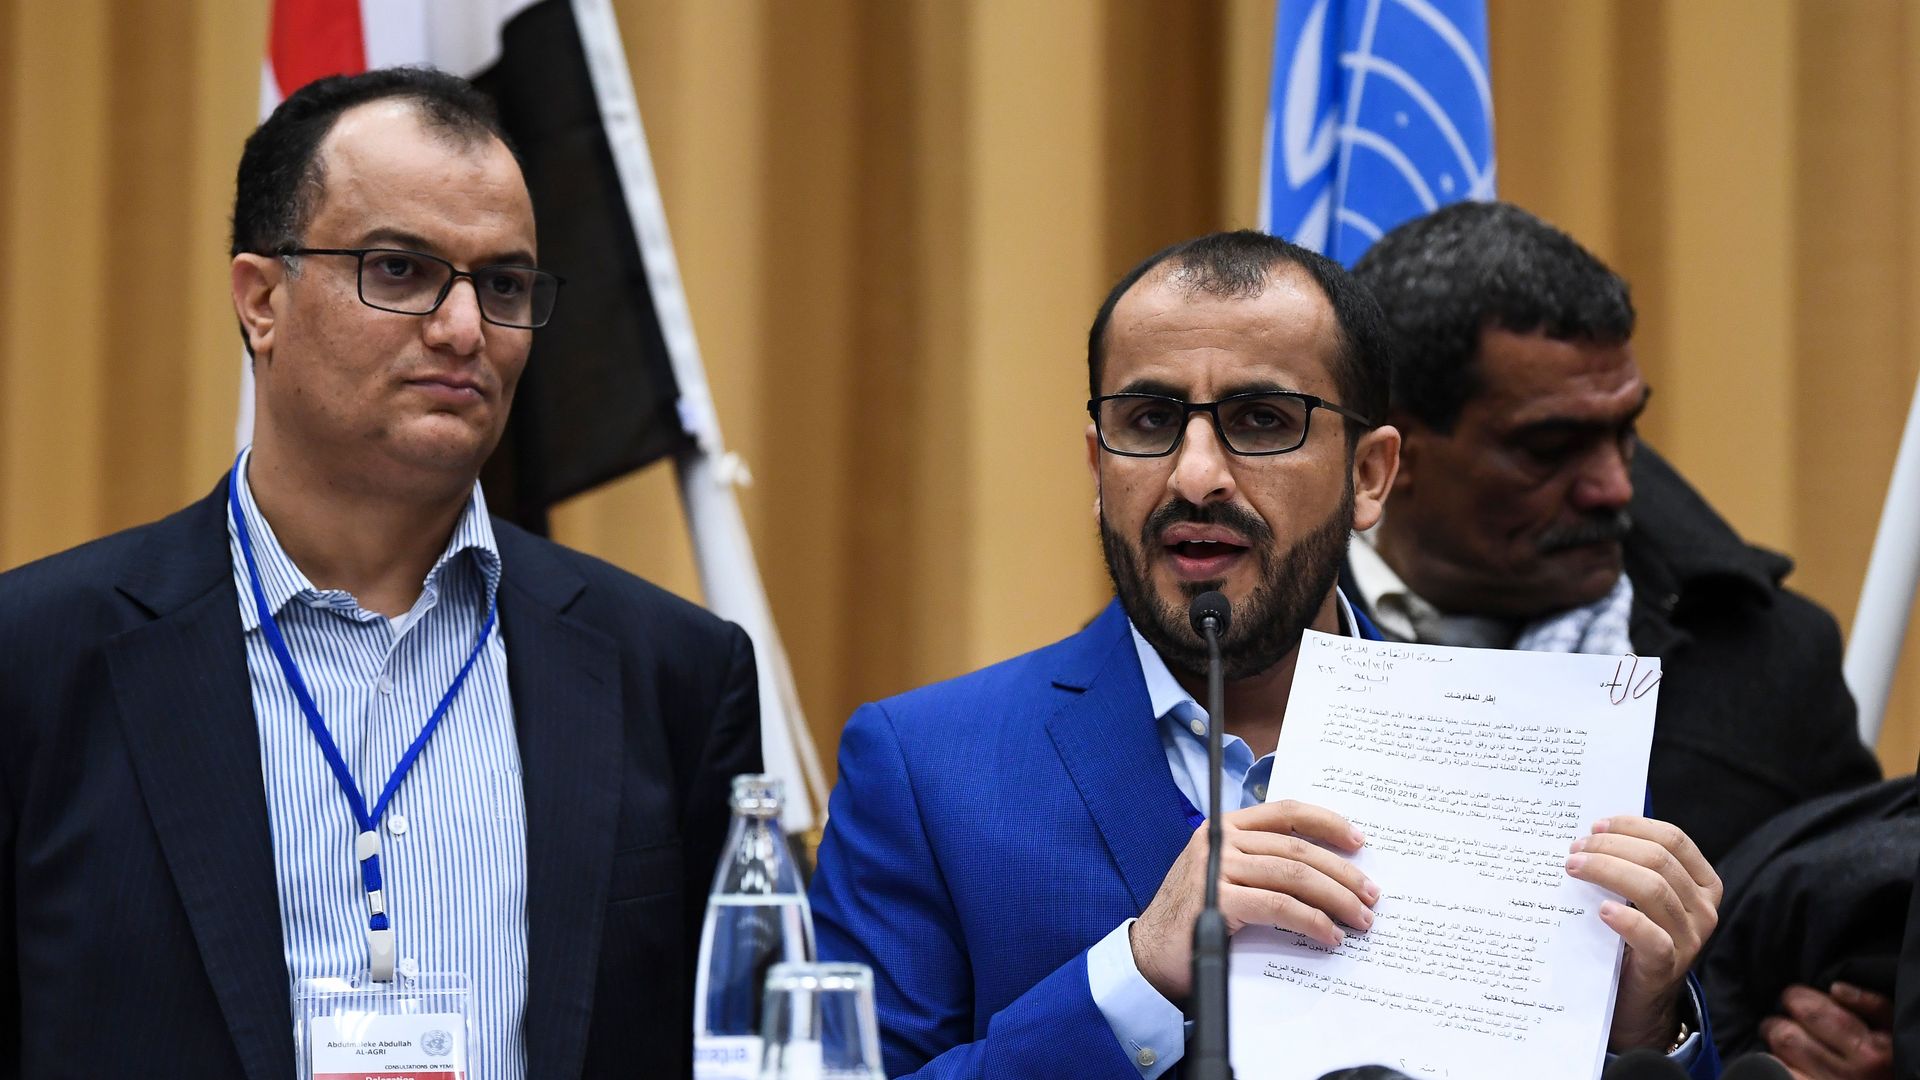 Rebel negotiator Mohammed Abdelsalam holds a press conference together with members of the delegation following the peace consultations taking place near Stockholm